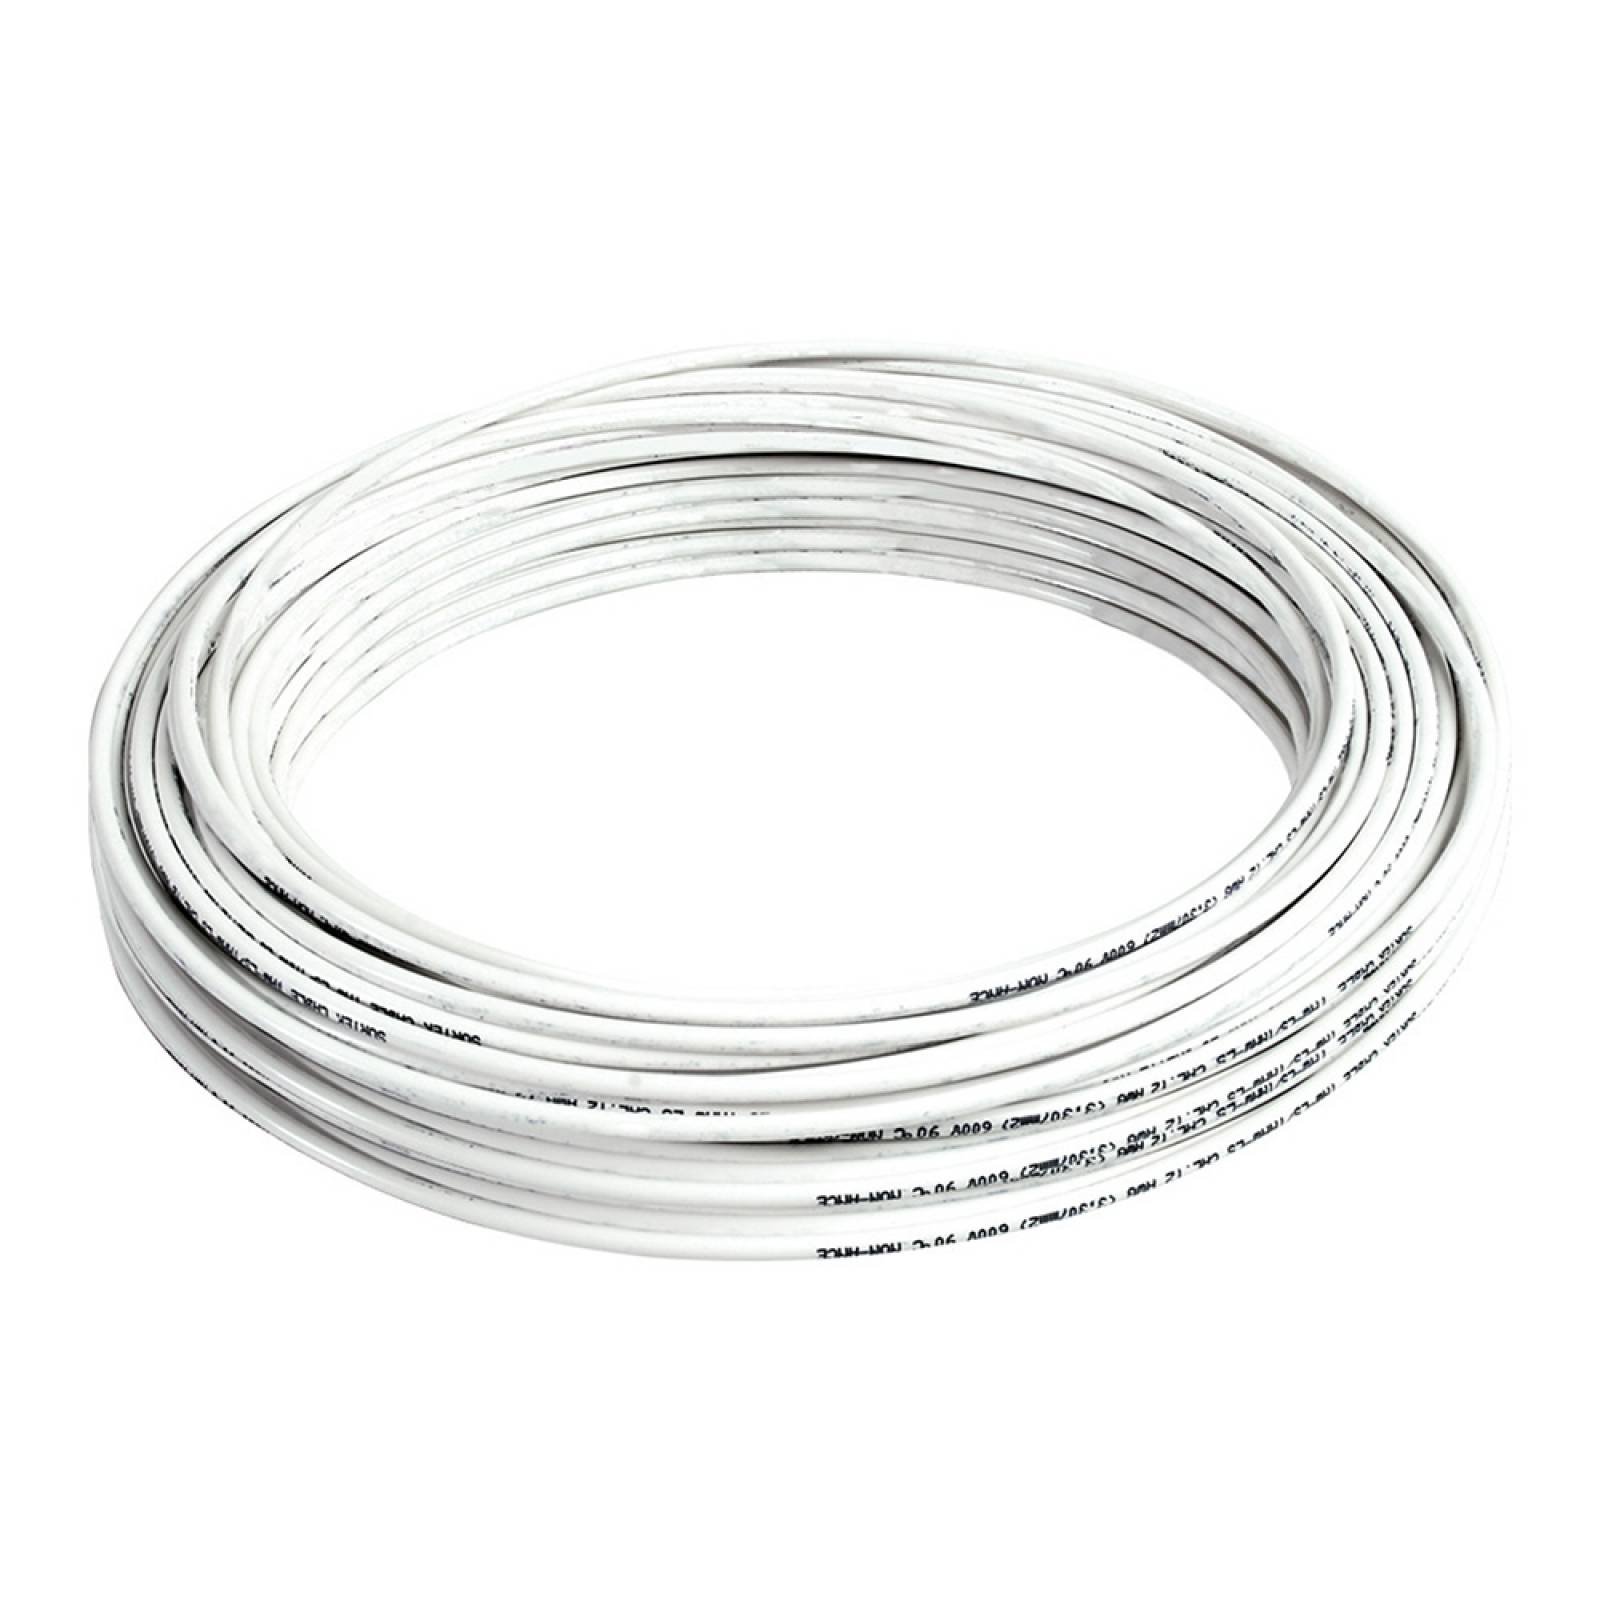 Cable Eléctrico Tipo Thw-ls/thhw-ls Cal10 100m Blanco 136917 